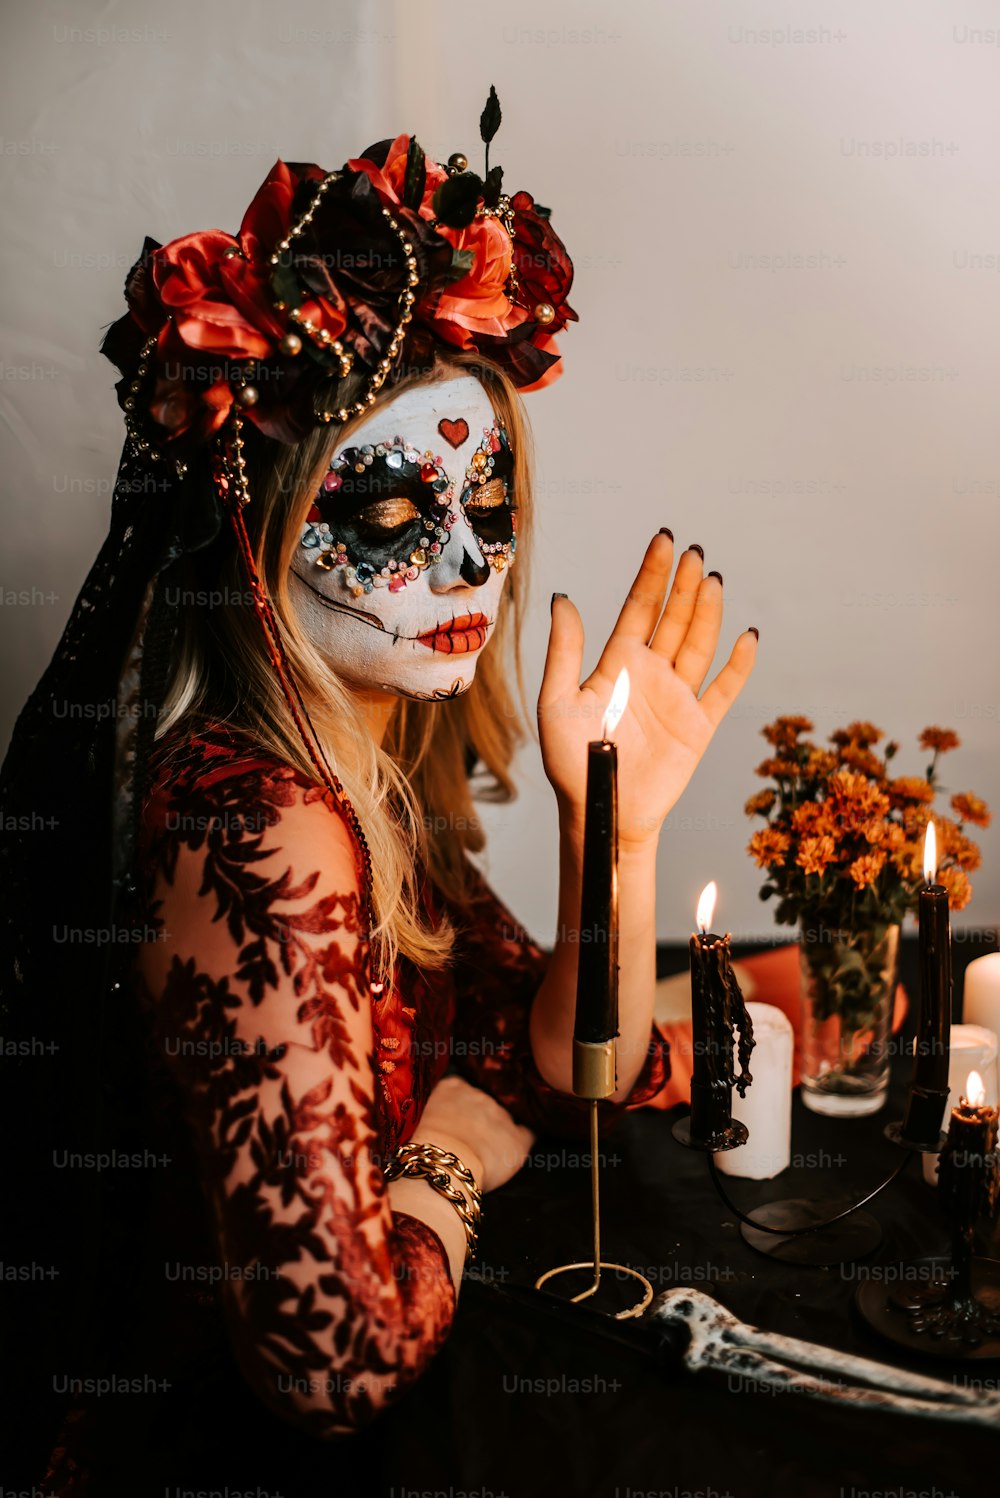 a woman with makeup and makeup art holding a candle